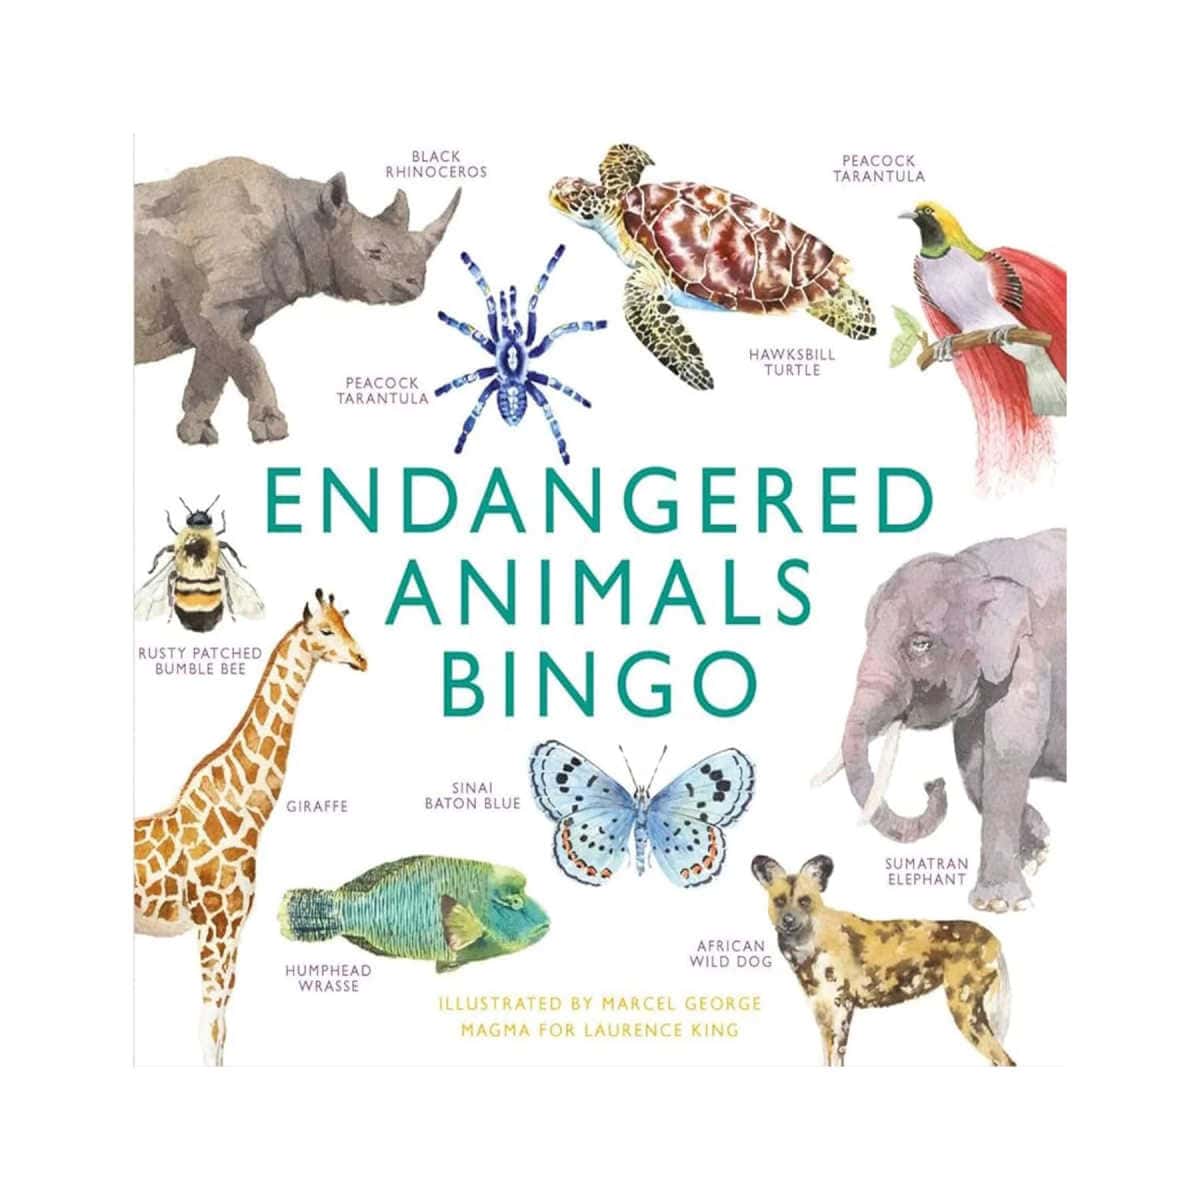 The lid of the Endangered Animals Bingo game featuring threatened animals.